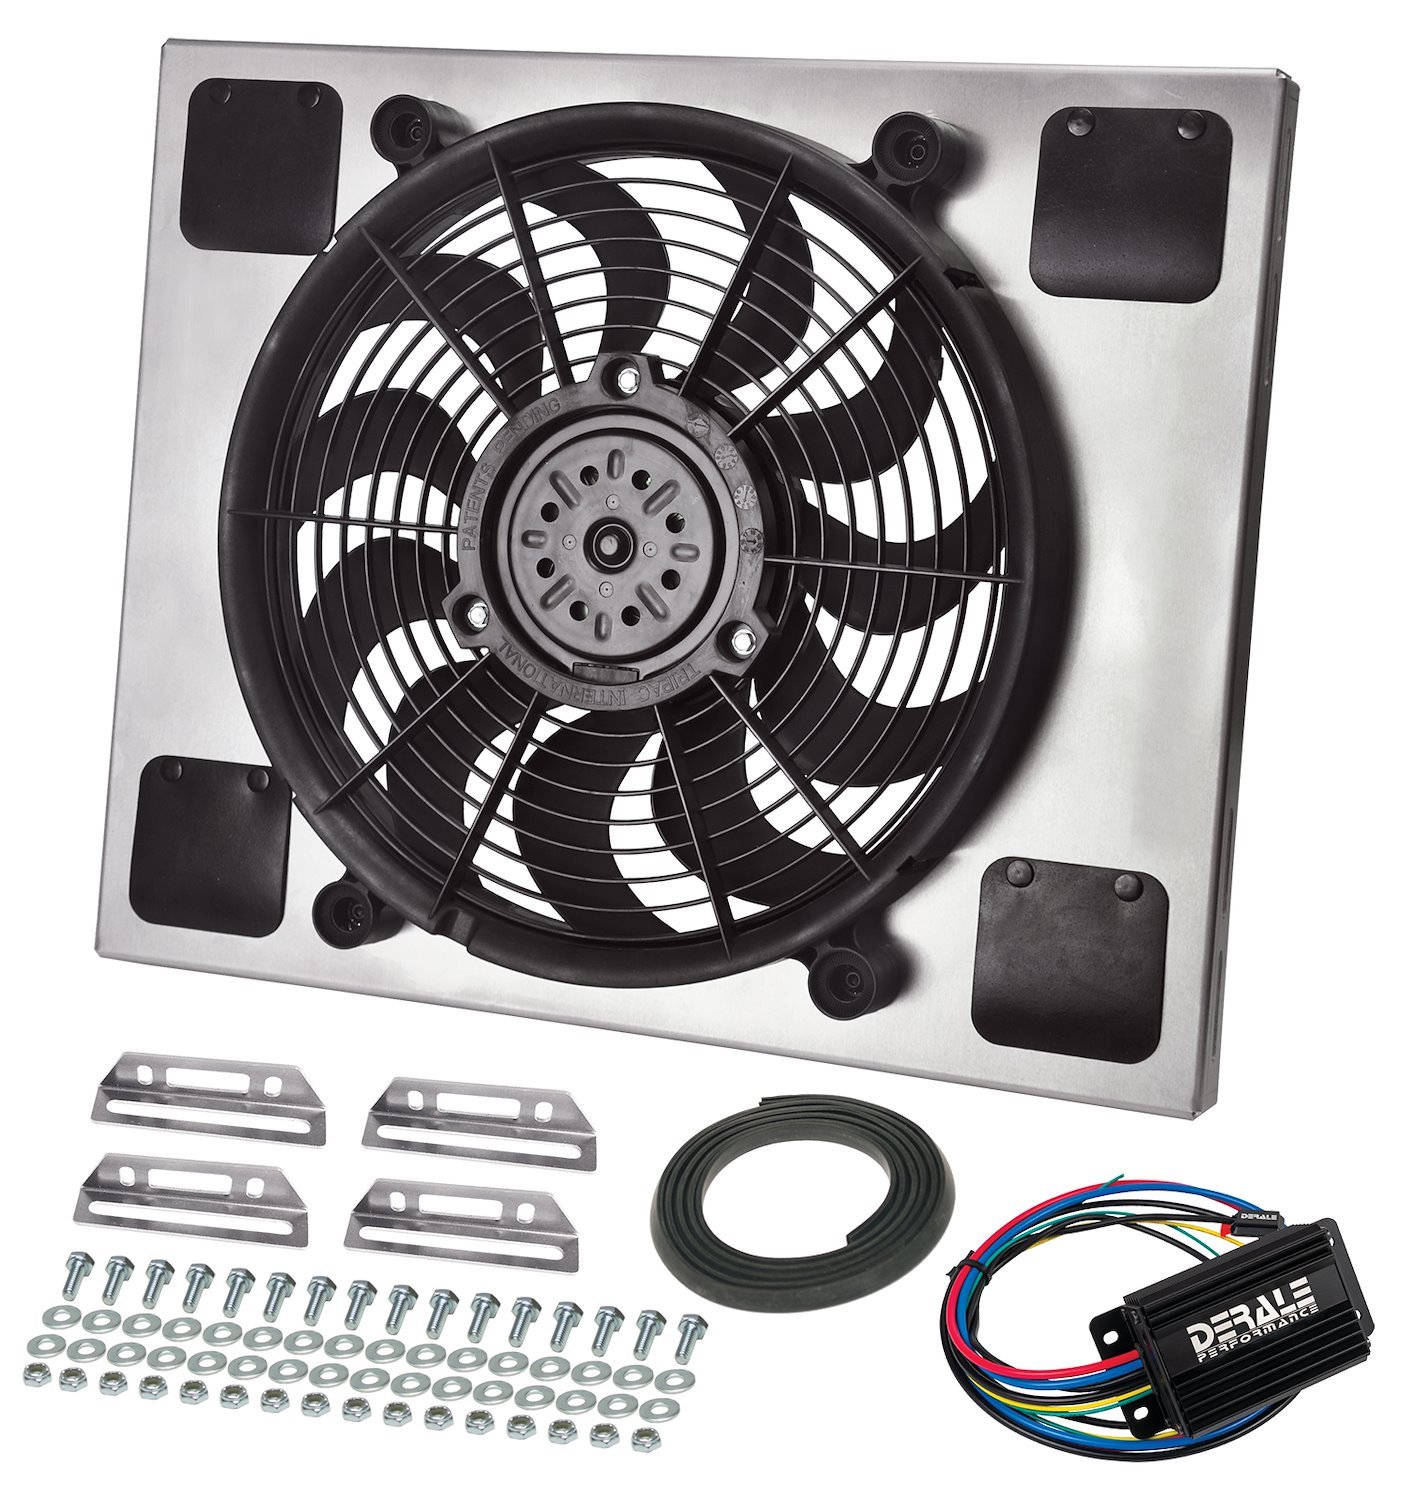 Multi-Speed Puller Fan With PWM Controller In Aluminum Shroud Universal Fit